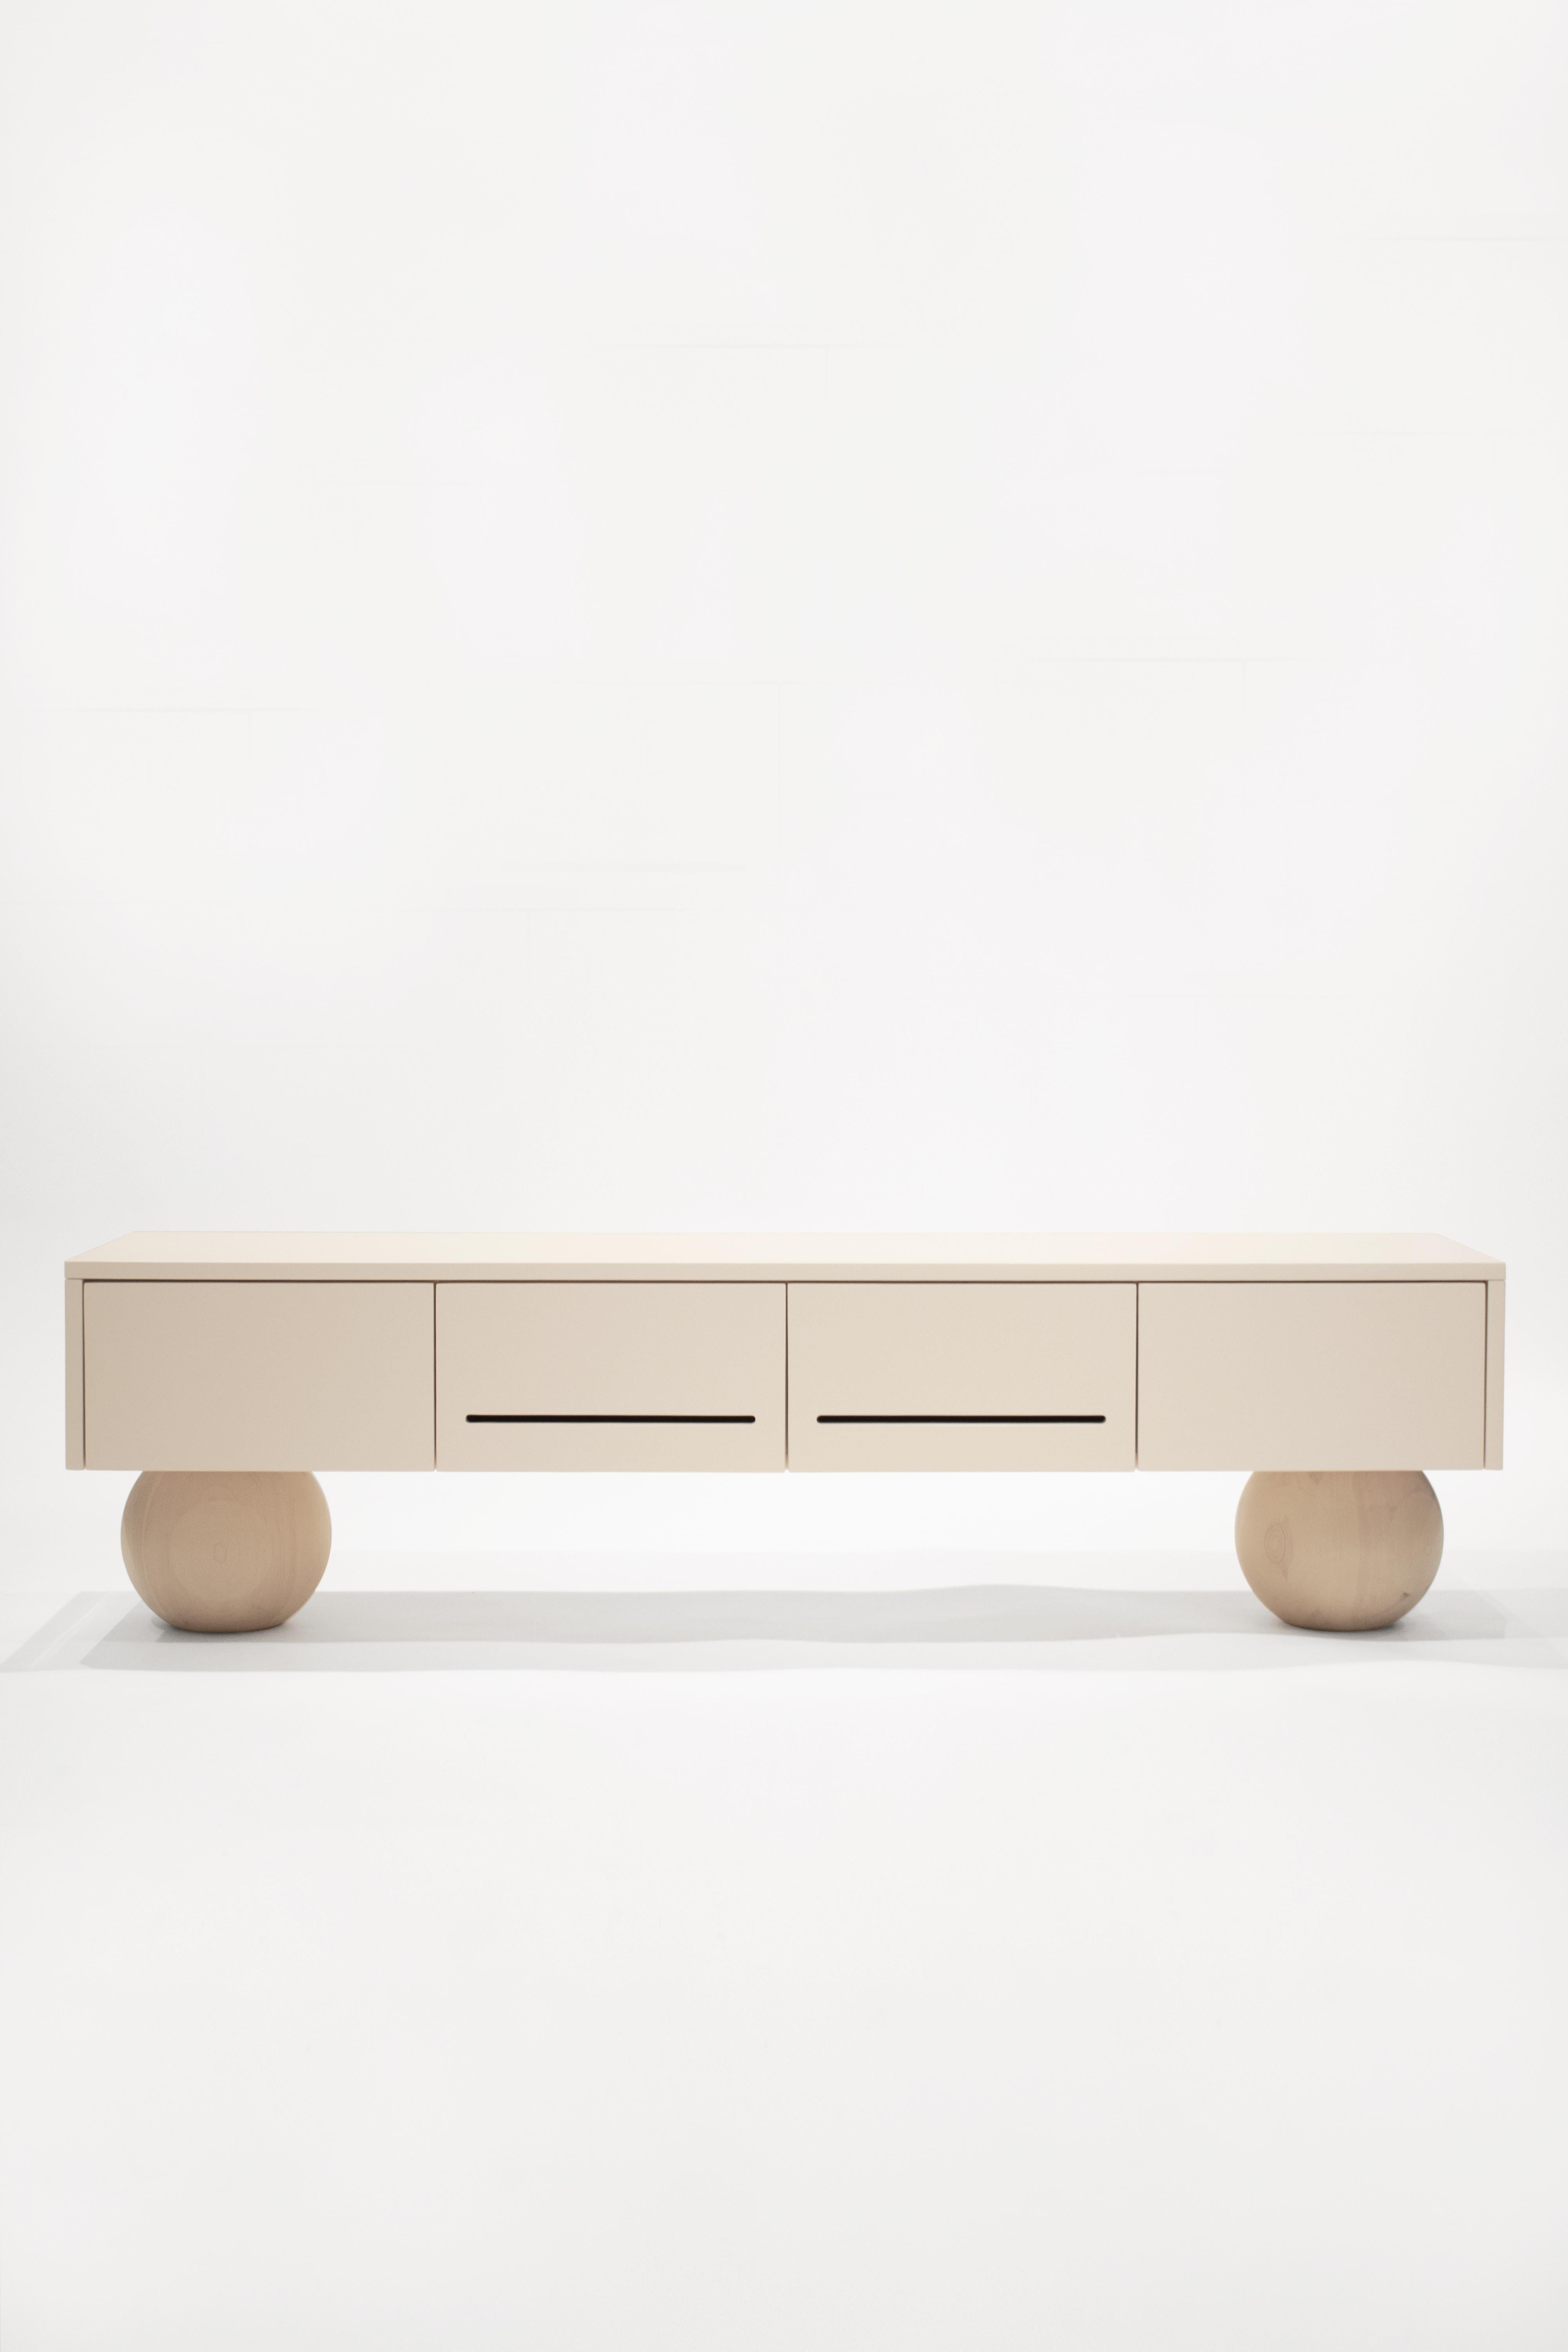 SOFT TV unit console in beige color and natural Swedish pine solid wood spheres.
With linear cuts on the front covers for giving access to remote control signals. A custom hole for cables can be made on the backside upon request.

The SOFT